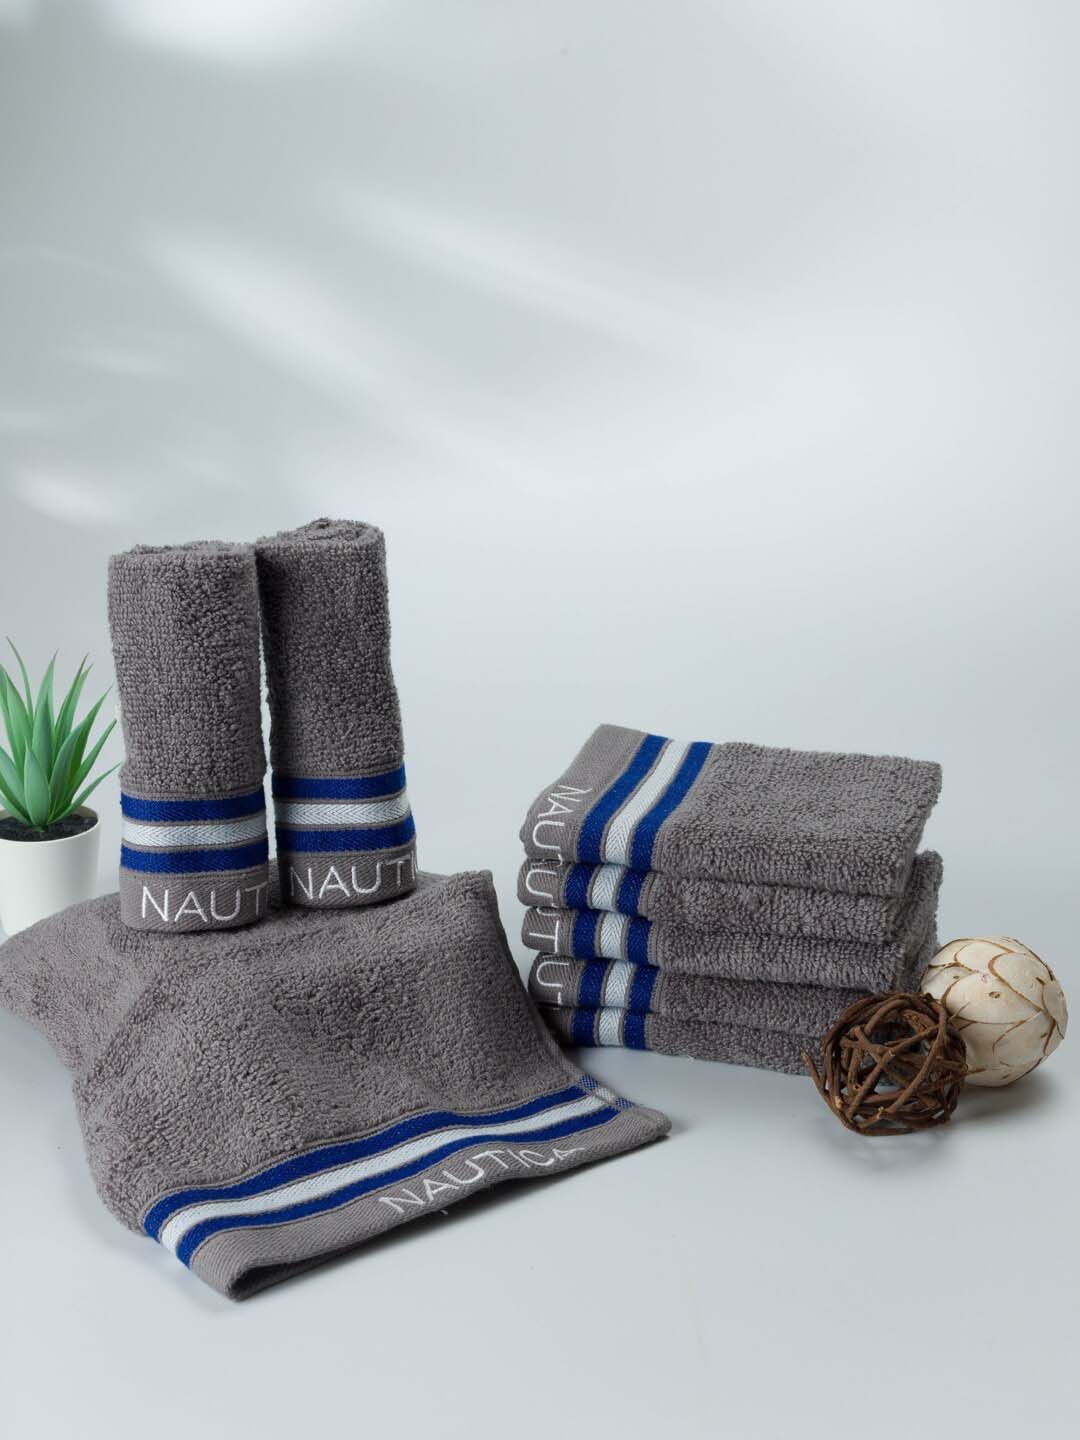 Nautica Set Of 8 500 GSM Pure Cotton Face Towels Price in India